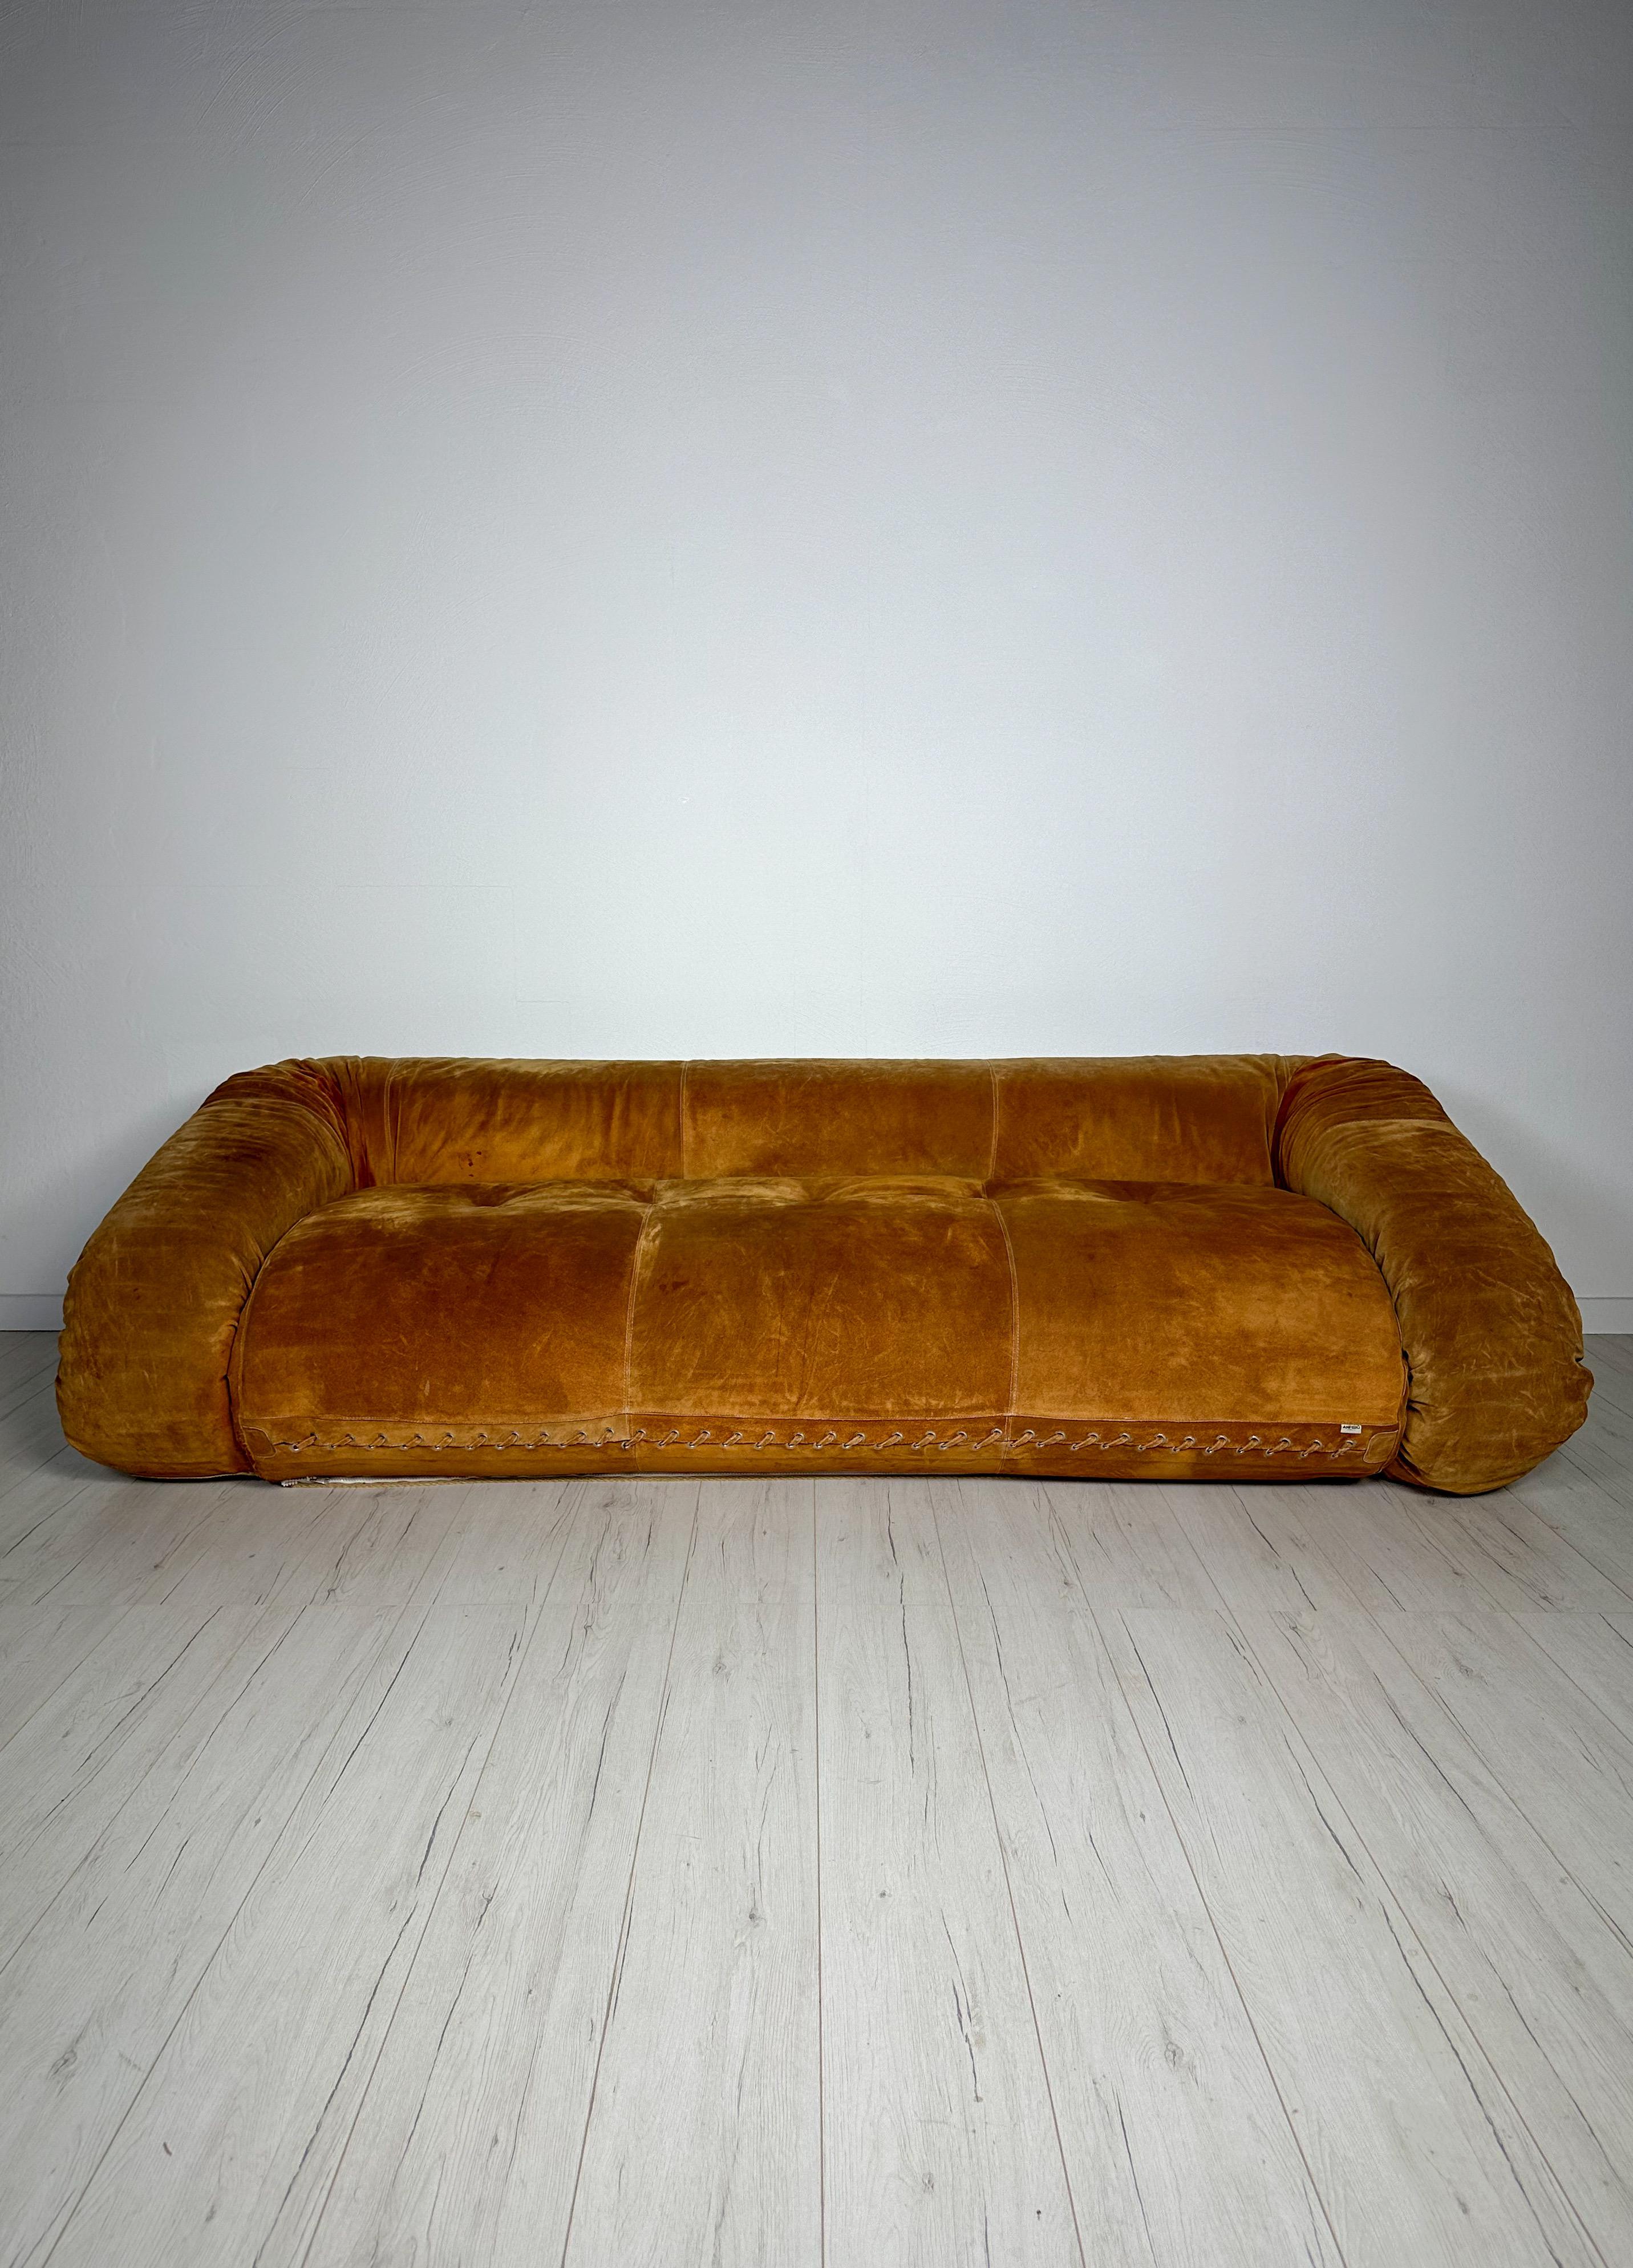 Very special, beautiful 3-seater ‘Anfibio’ sofa by Alessandro Becchi for Giovannetti, Italy around 1970. Wonderful suede in cognac/golden brown with unique patina and color gradients. Unfolded with sleep function and a mattress padded inside with